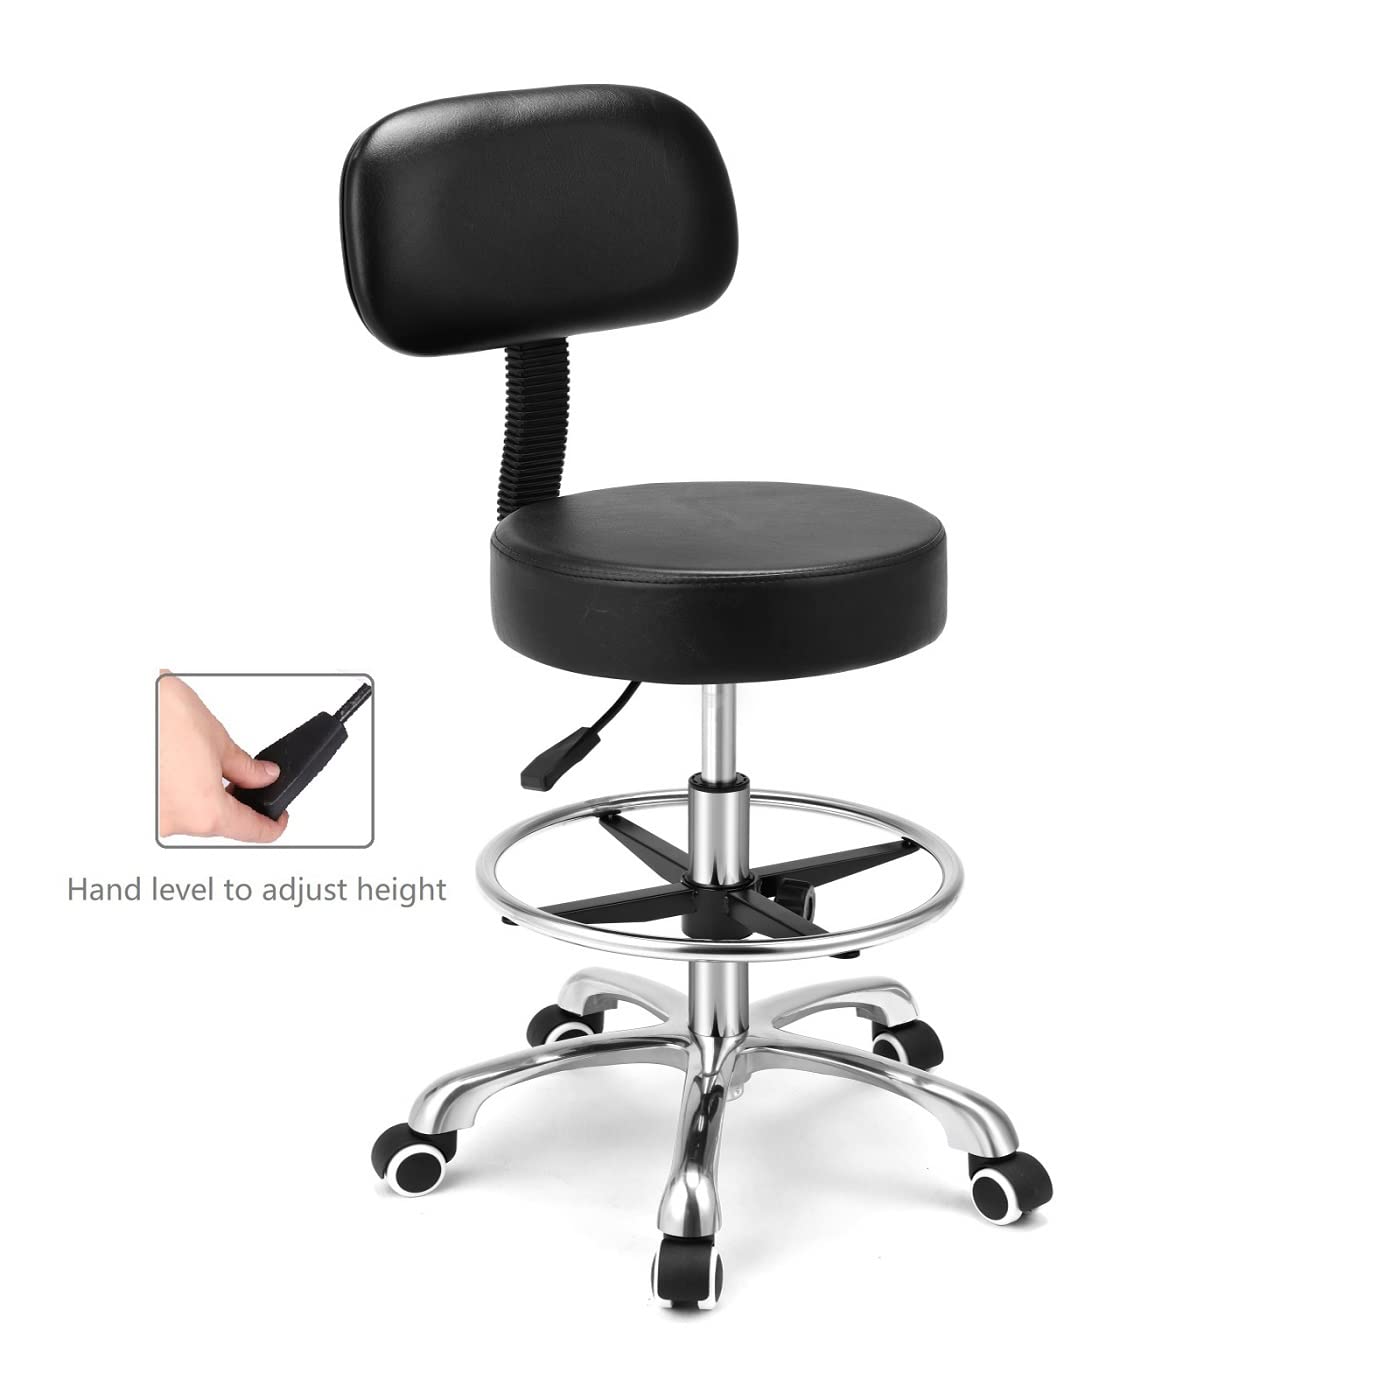 Kaleurrier Rolling Swivel Adjustable Heavy Duty Drafting Stool Chair for Salon,Medical,Office and Home uses,with Wheels and Back (Black with Footrest)